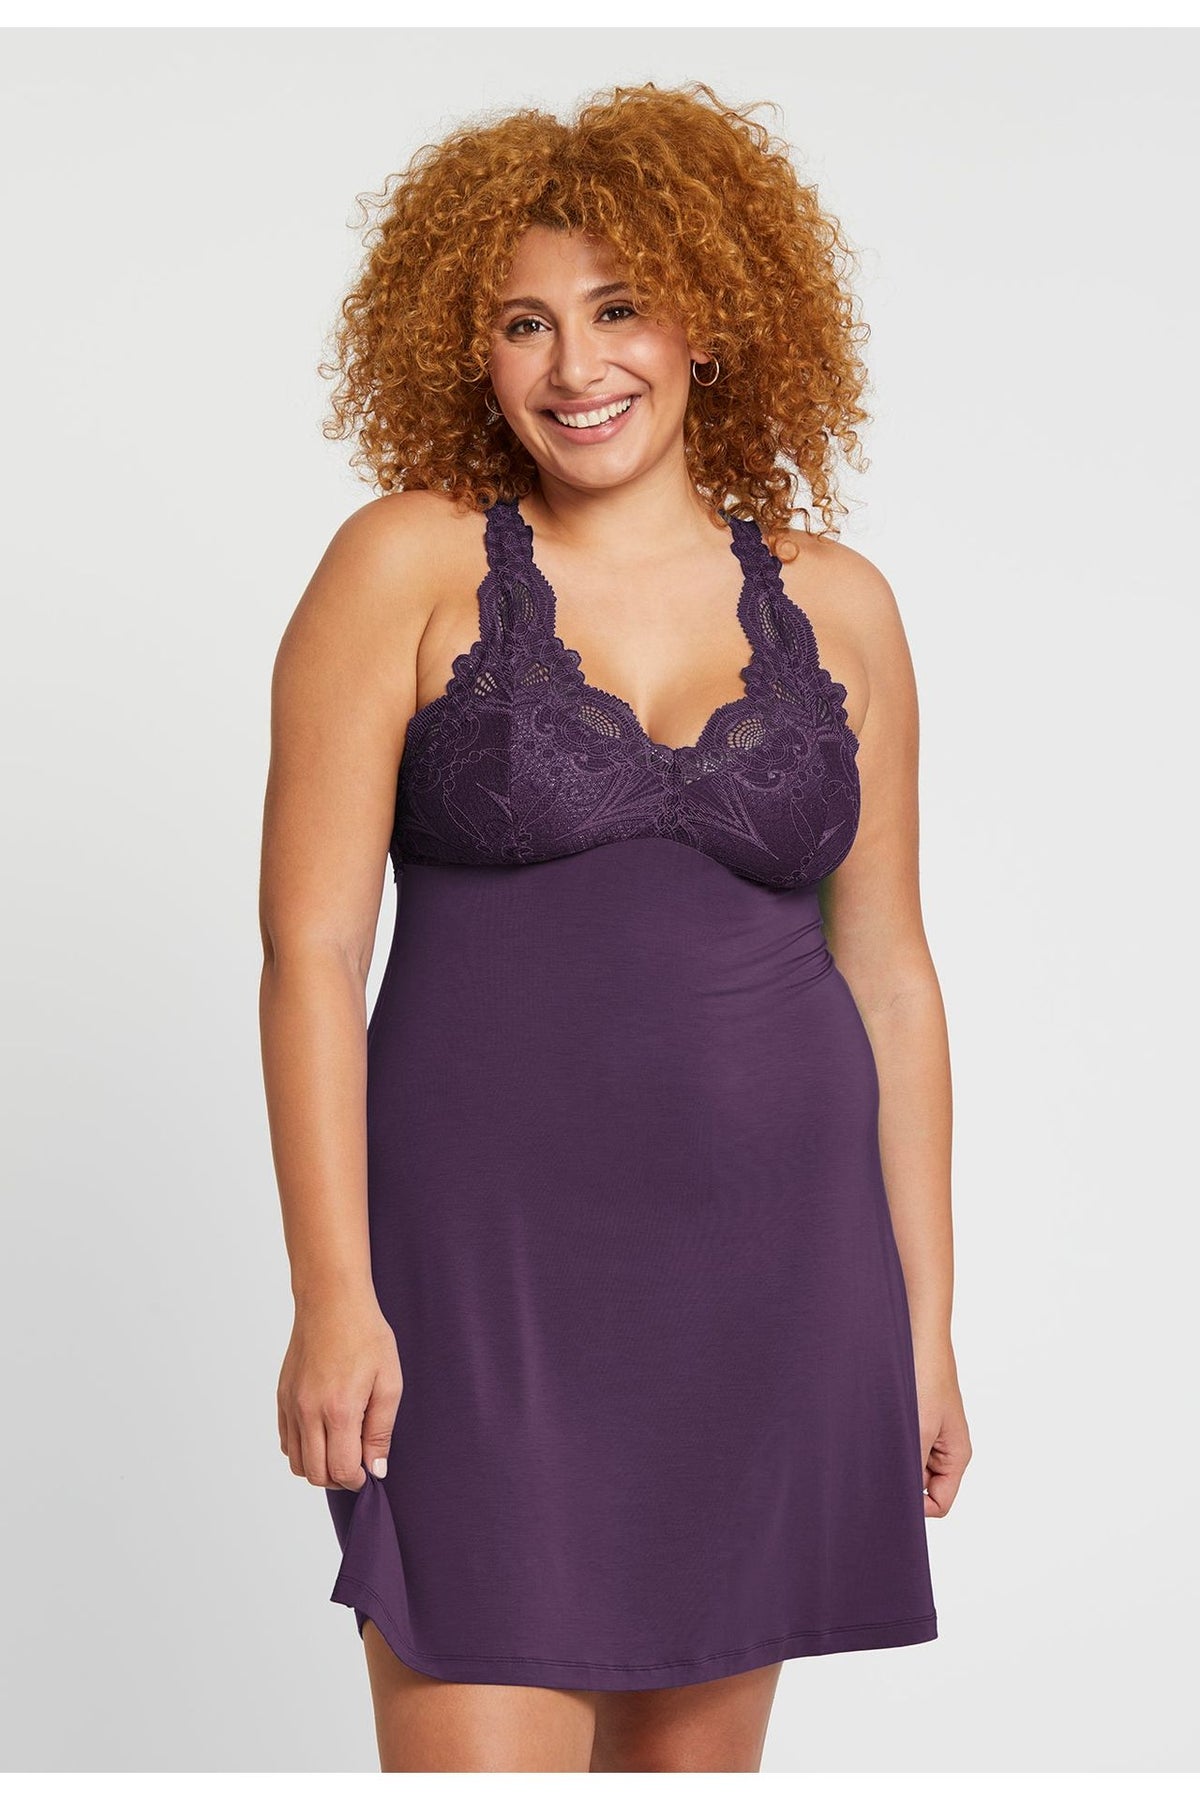 Fleur't Iconic Full Chemise - Style 630F, front